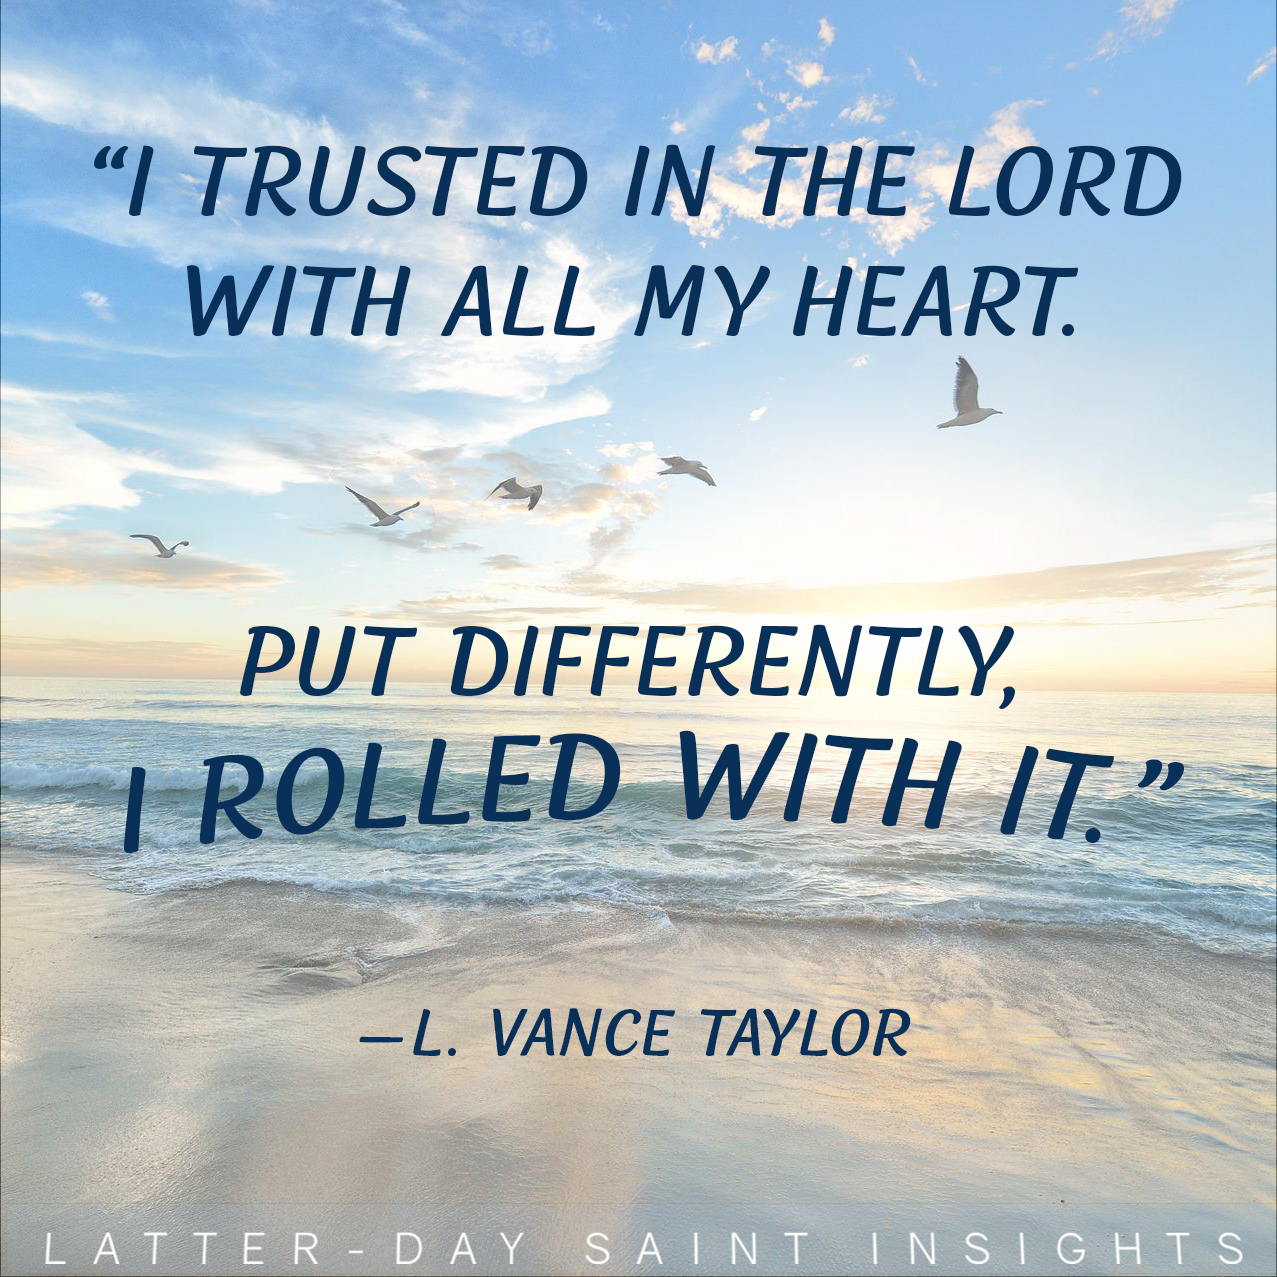 "I trusted in the Lord with all my heart. Put differently, I rolled with it." By L. Vance Taylor. Ocean waves.